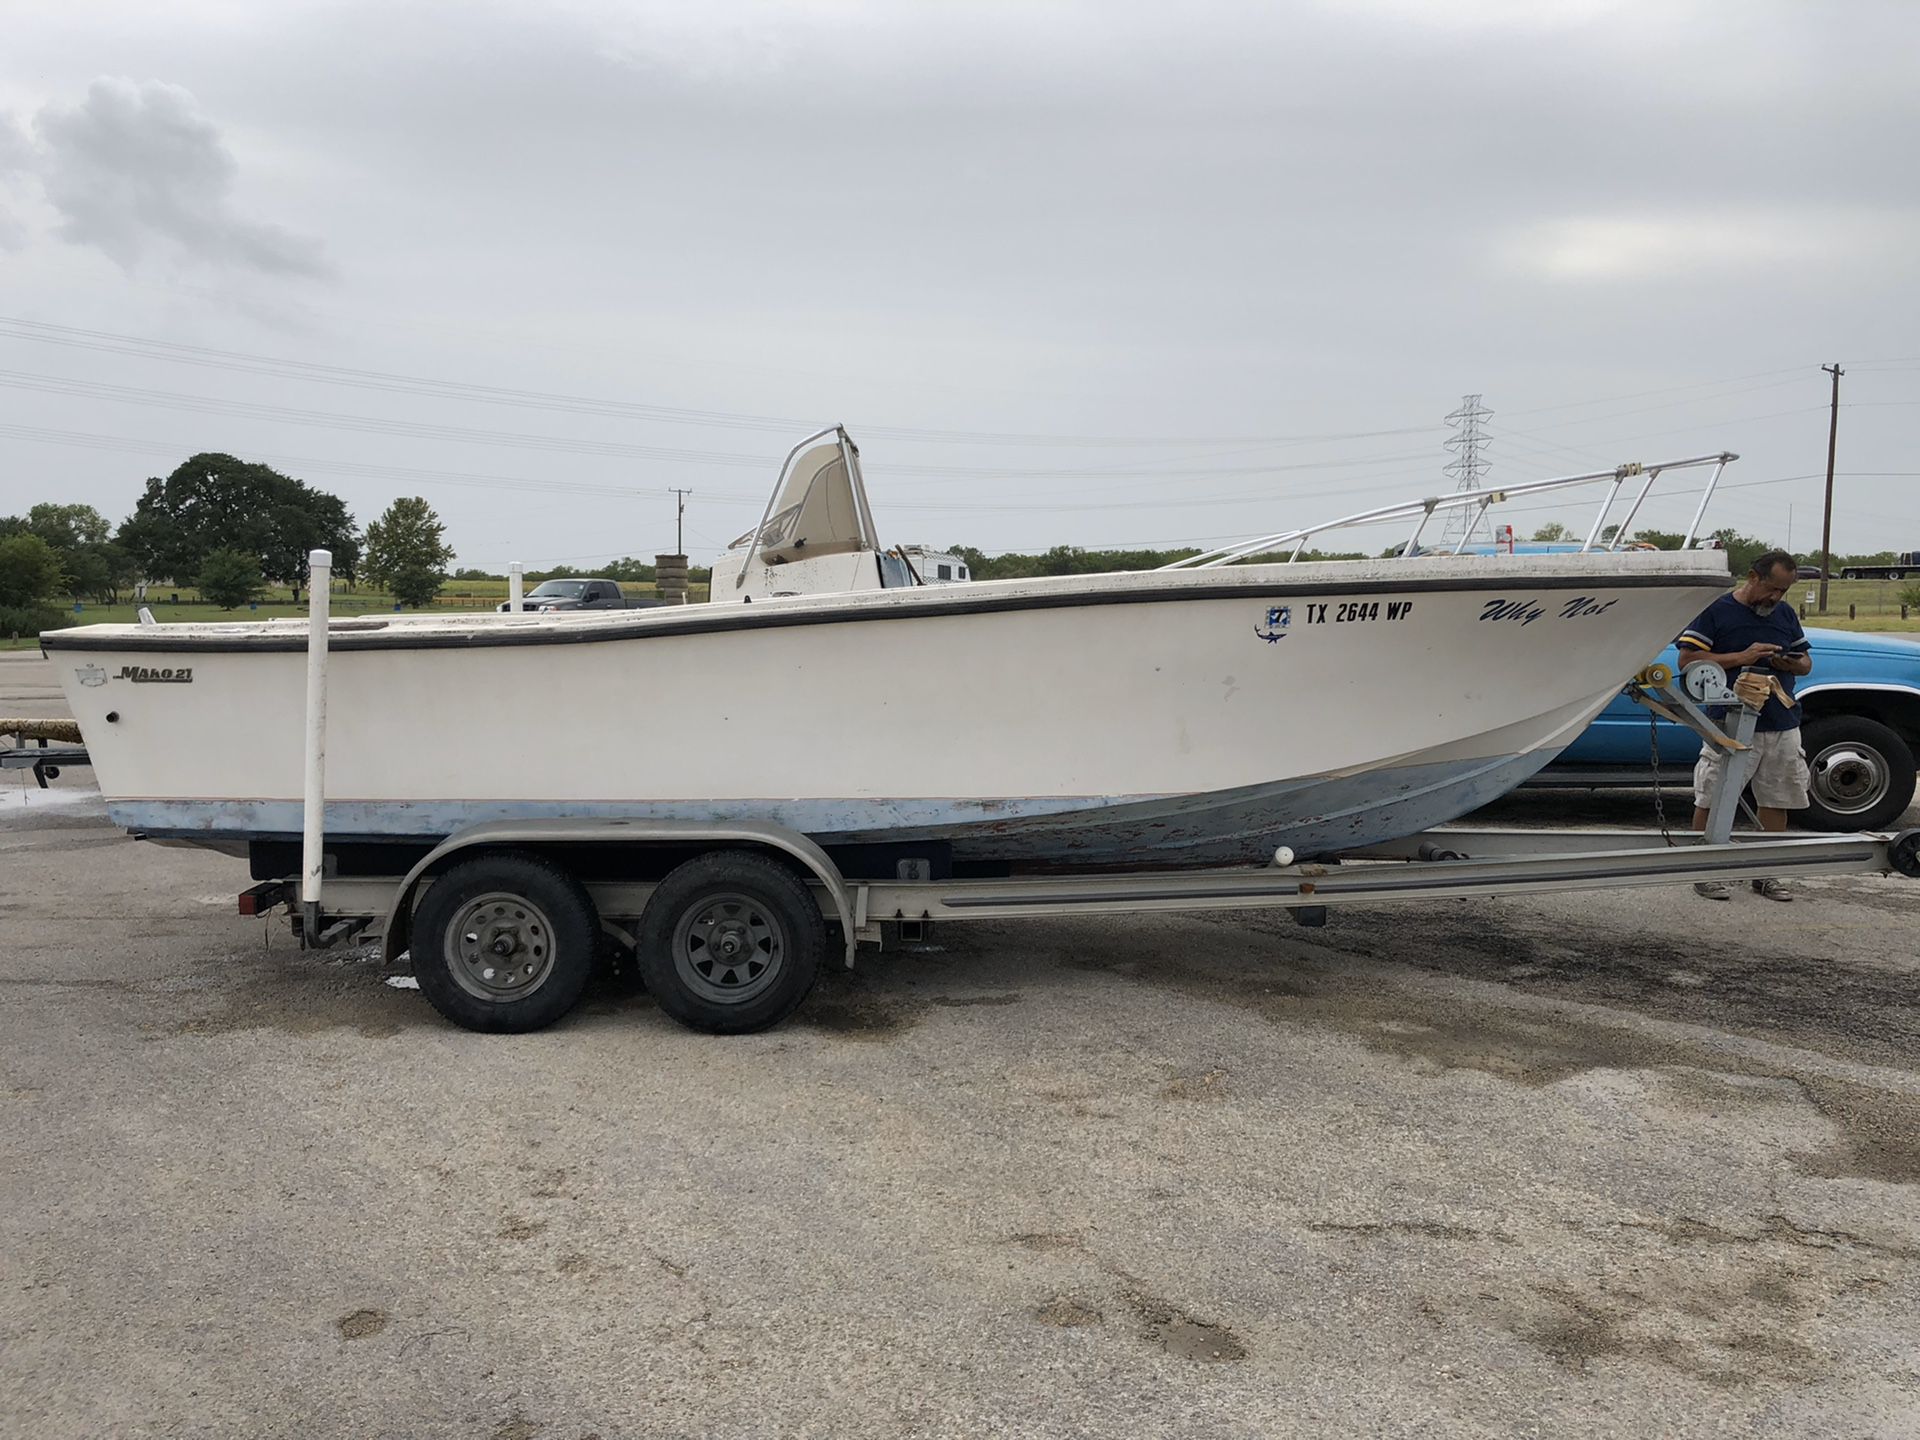 21 ft classic mako for sale. Comes with aluminum trailer no motor. It is a project boat with great potential.